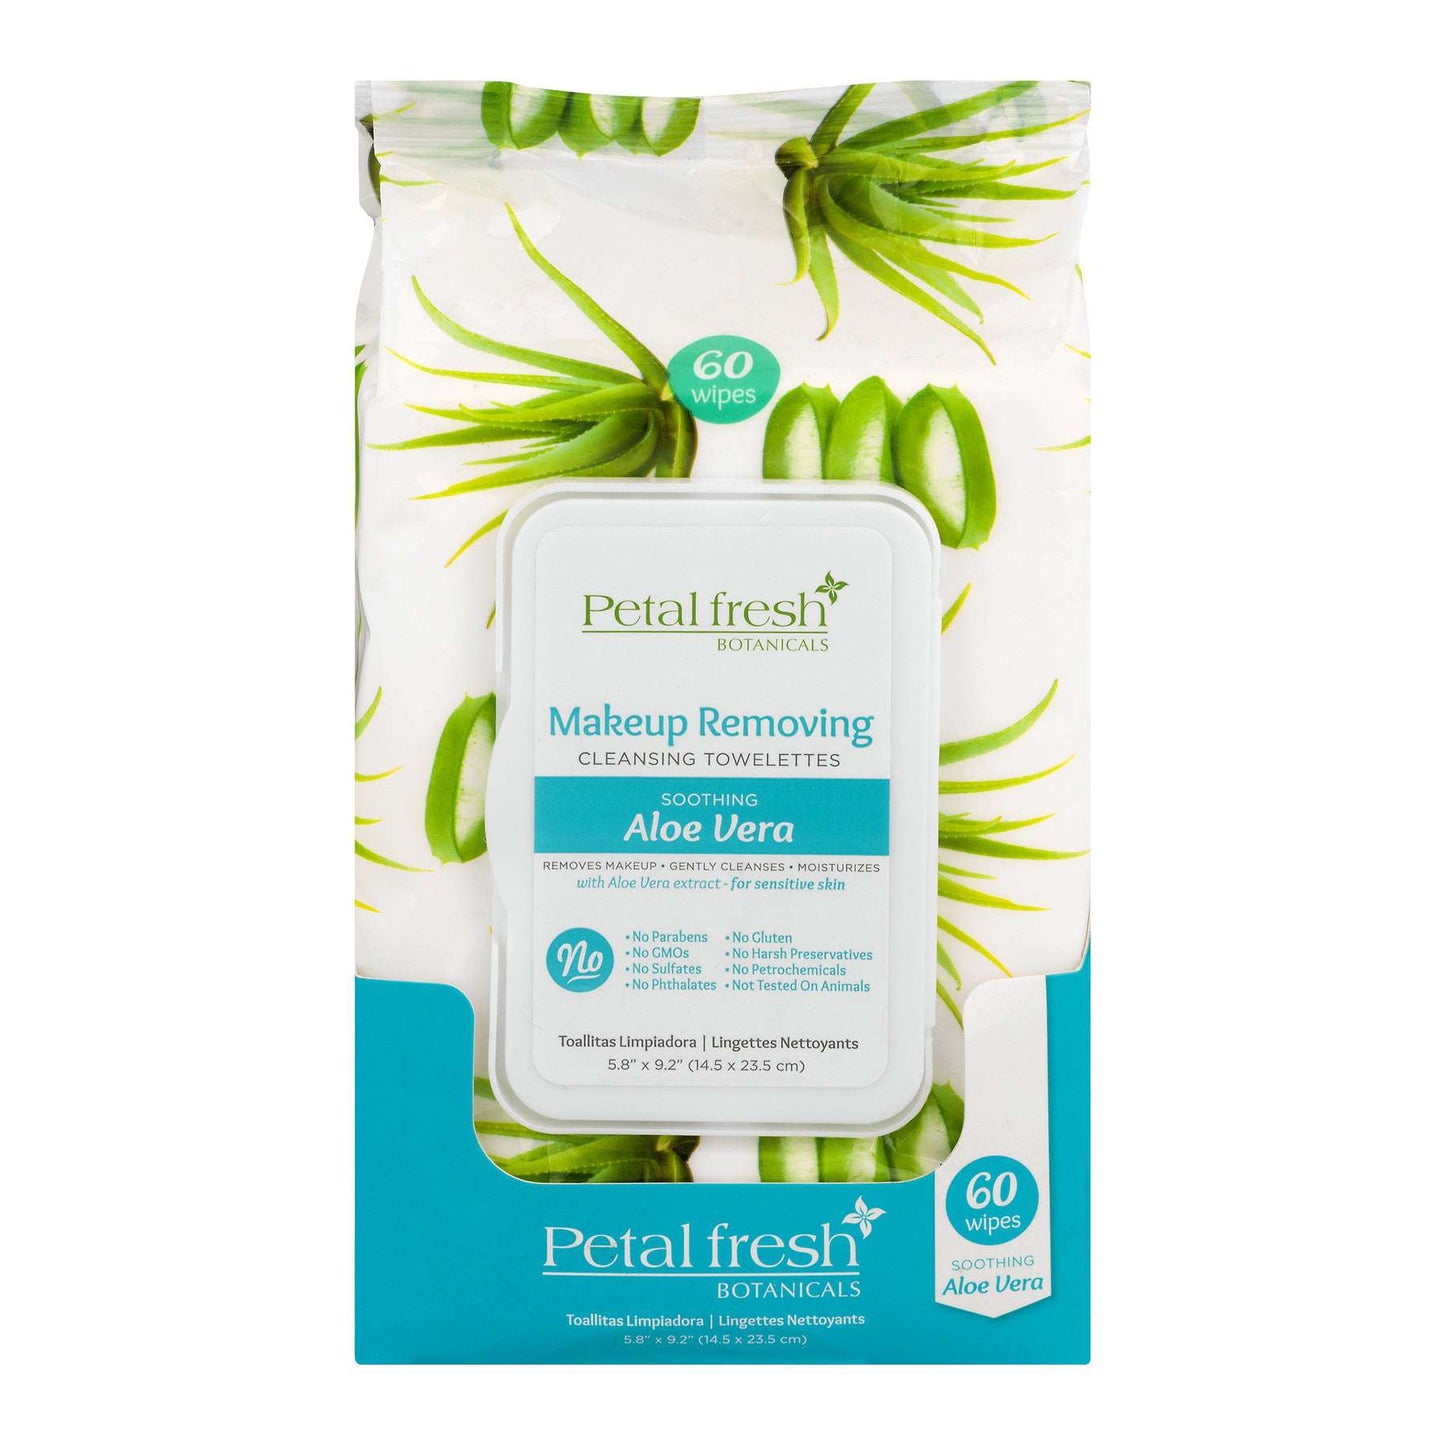 Make-Up Removing Cleansing Towelettes Aloe Vera